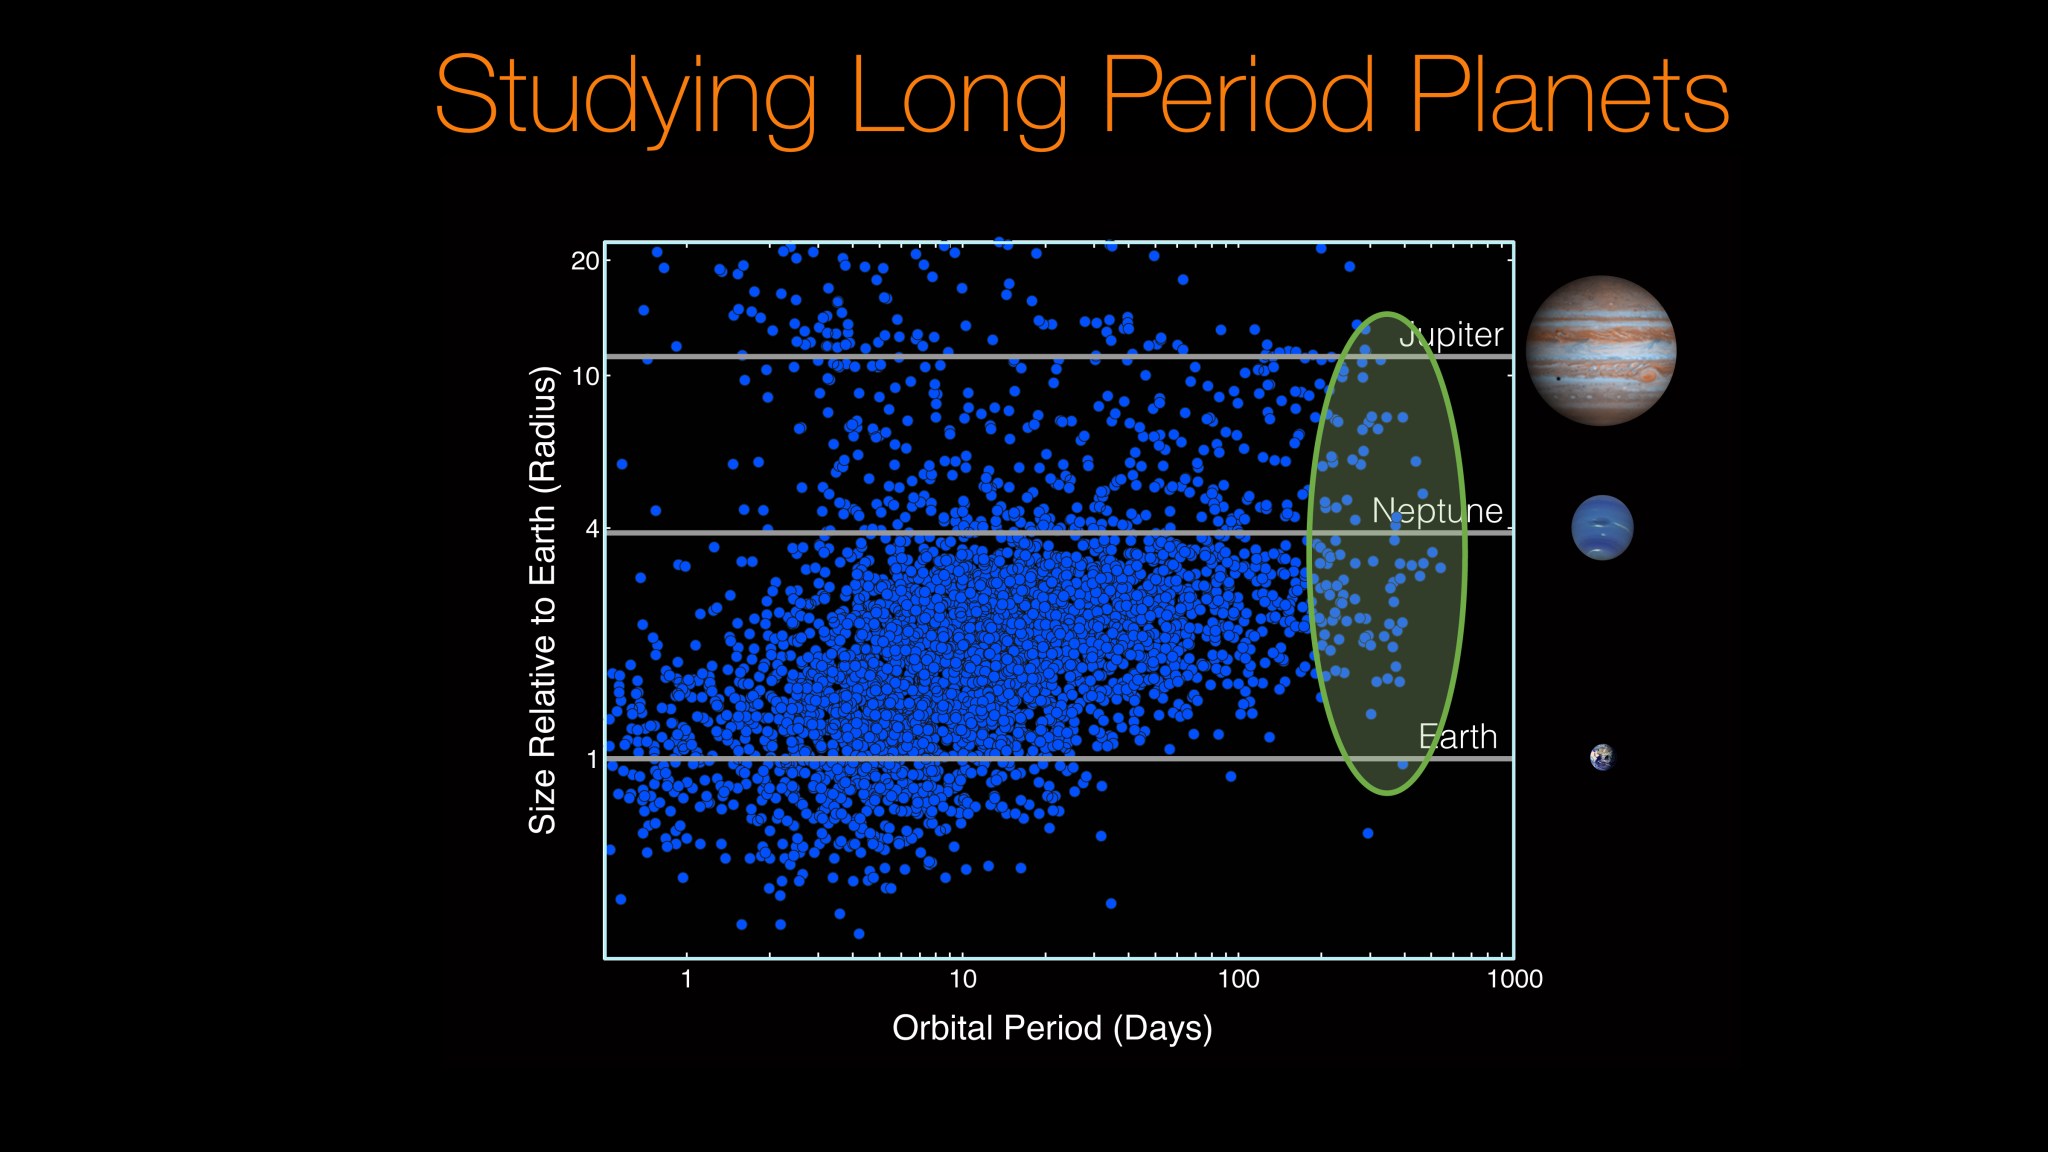 Studying Long Period Planets